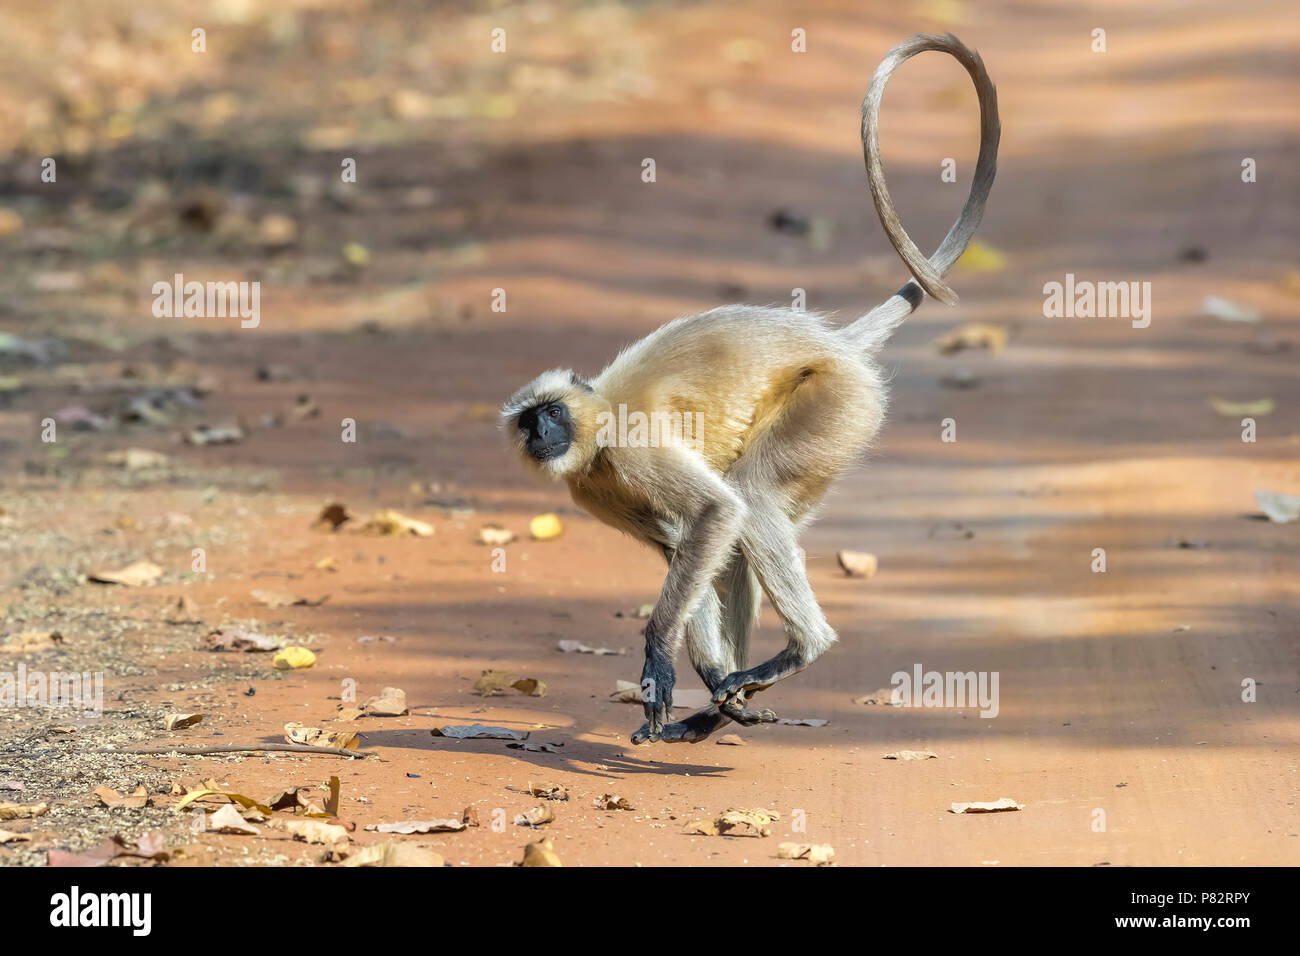 Adult Northern Plains Langur running on a track in Bandavgarh NP, India. March 2017. Stock Photo